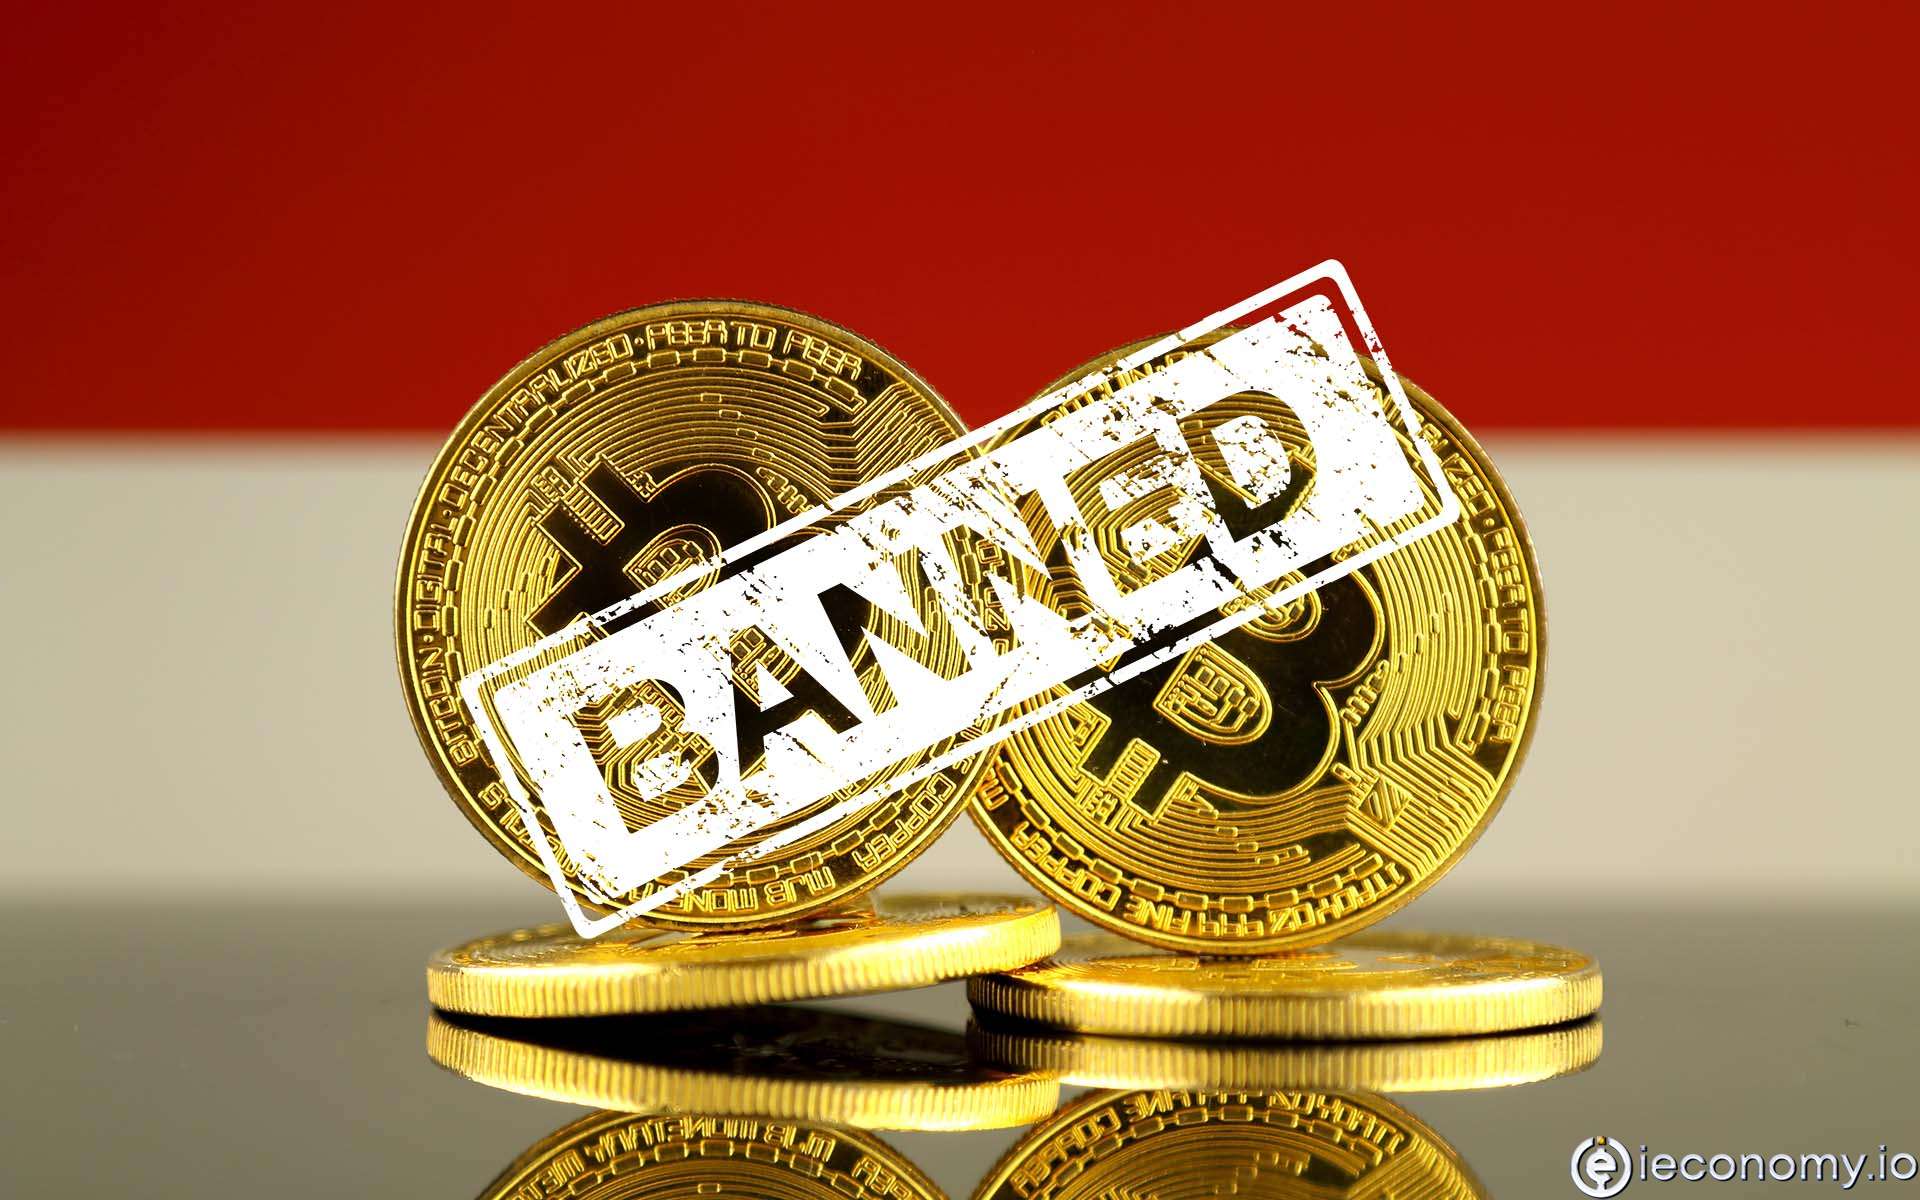 Uzbekistan blocks access to foreign crypto exchanges due to unregistered trading